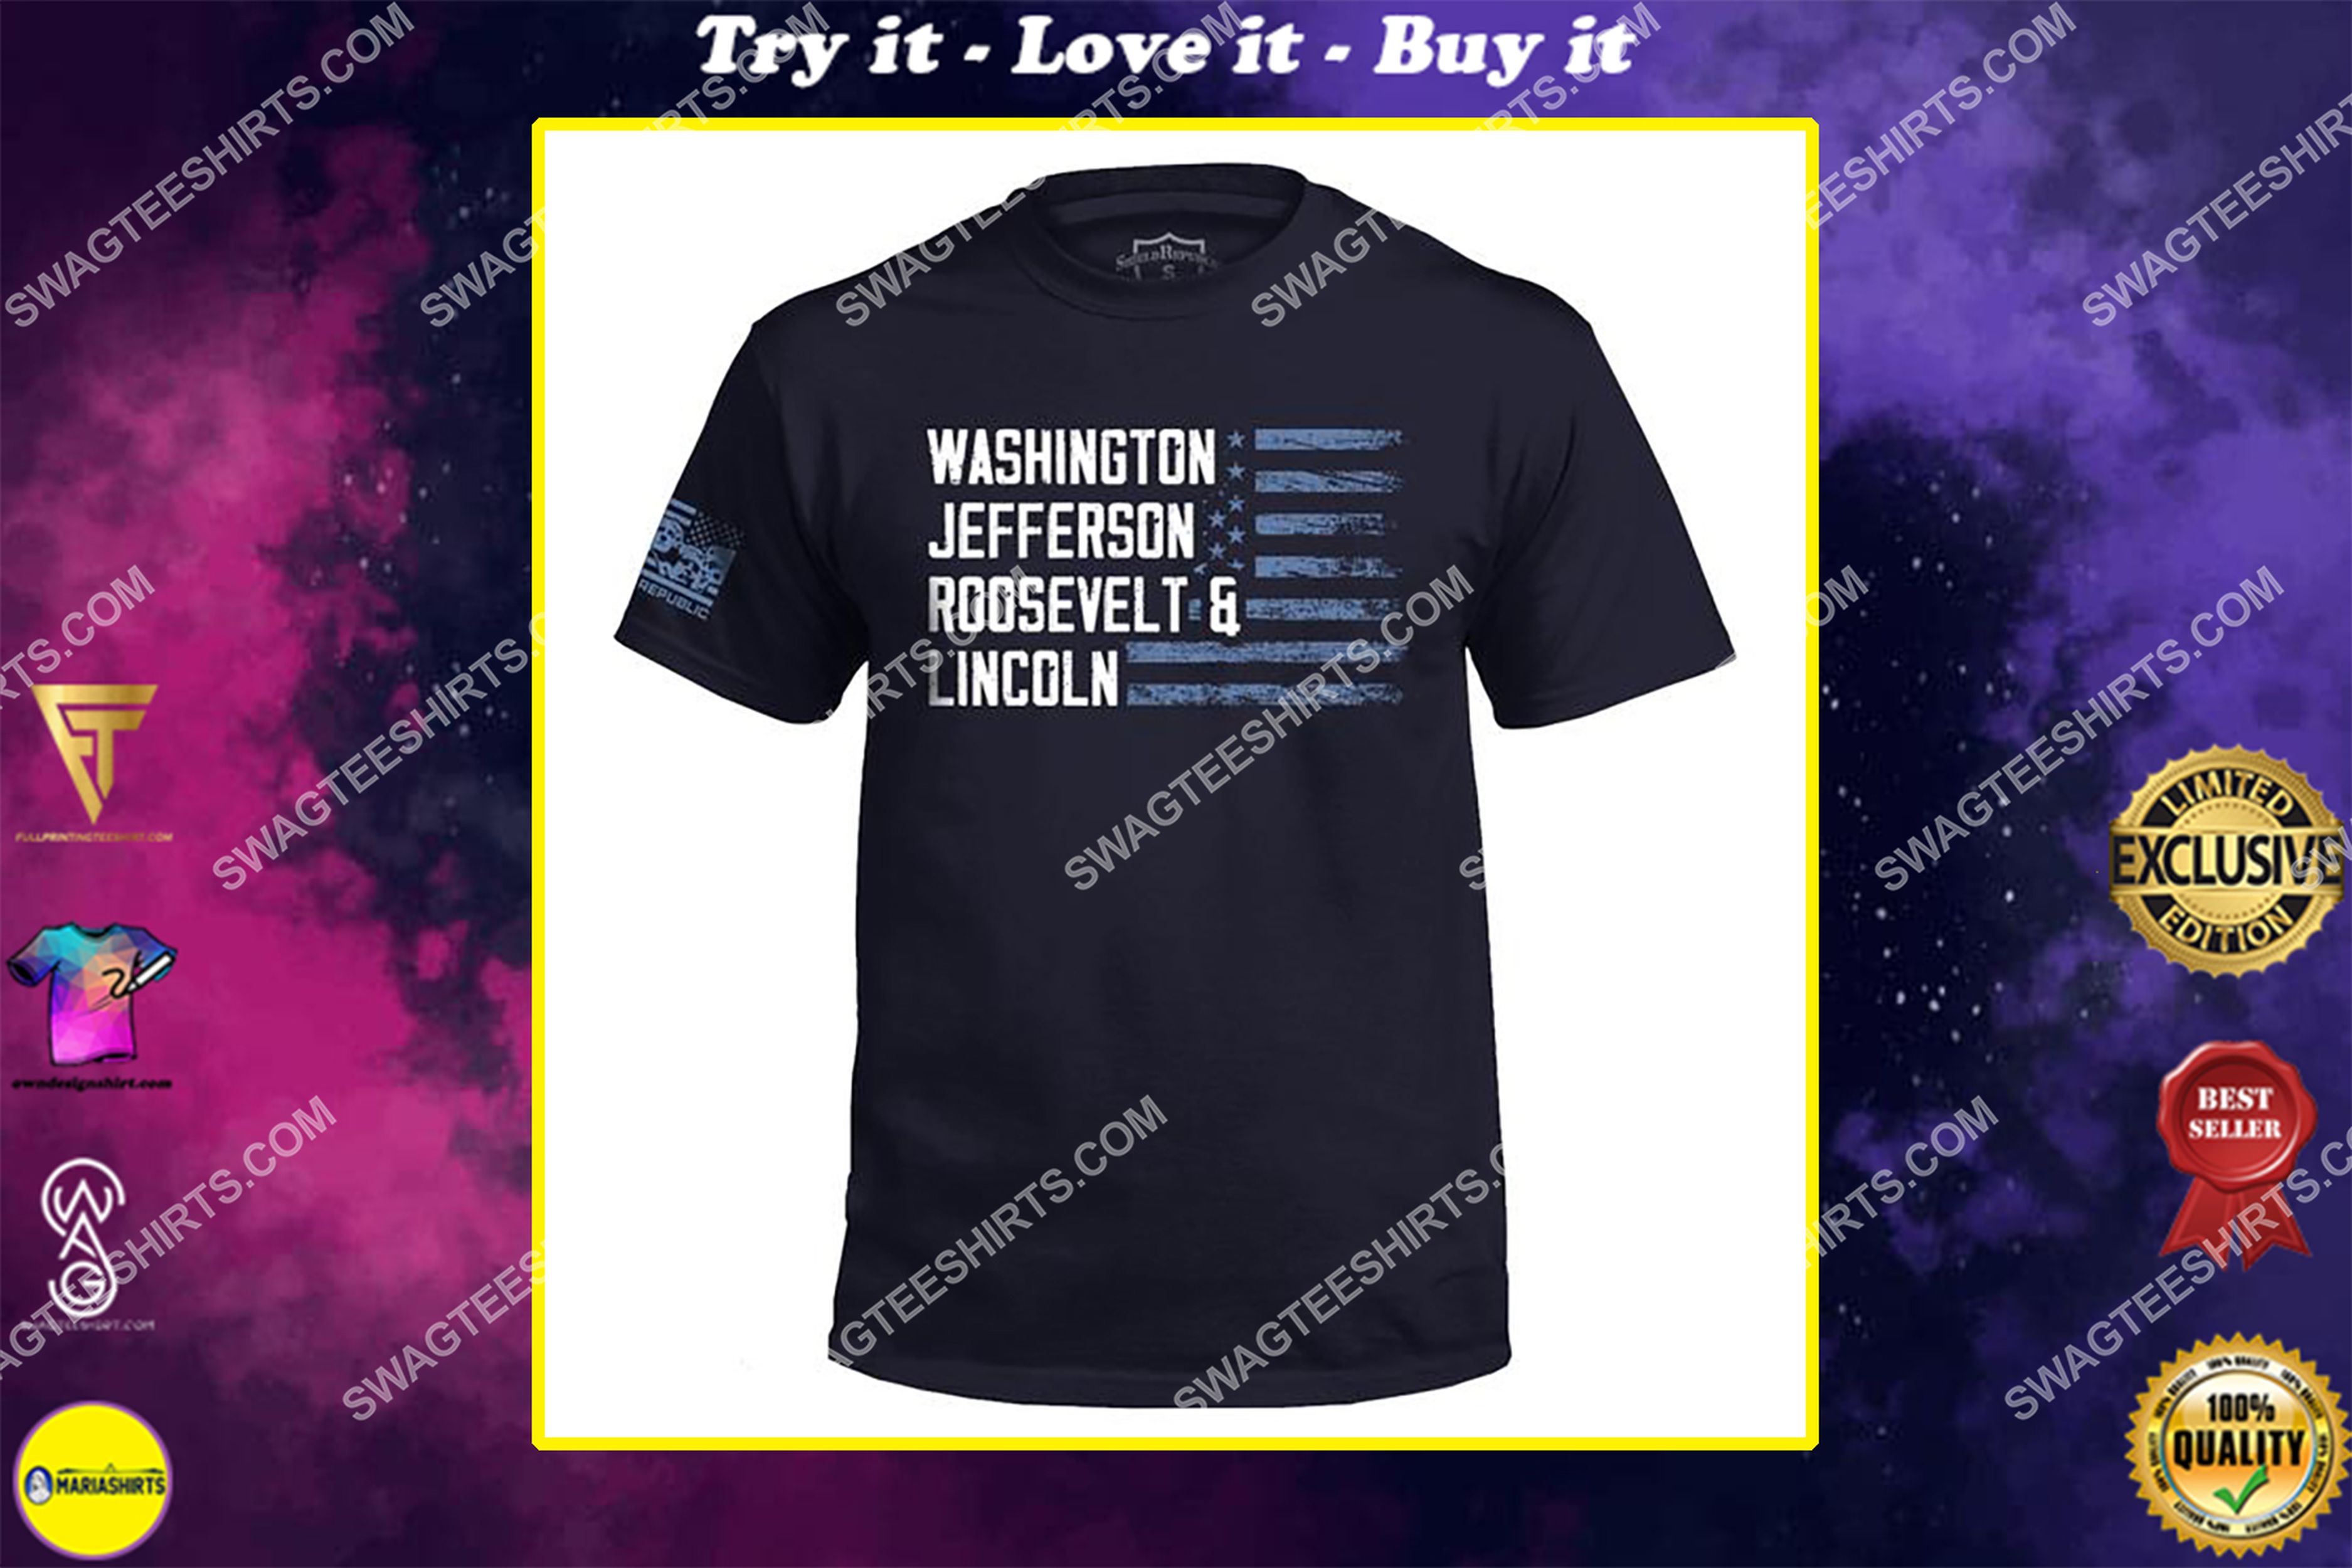 [special edition] washington jefferson roosevelt and lincoln political shirt – maria